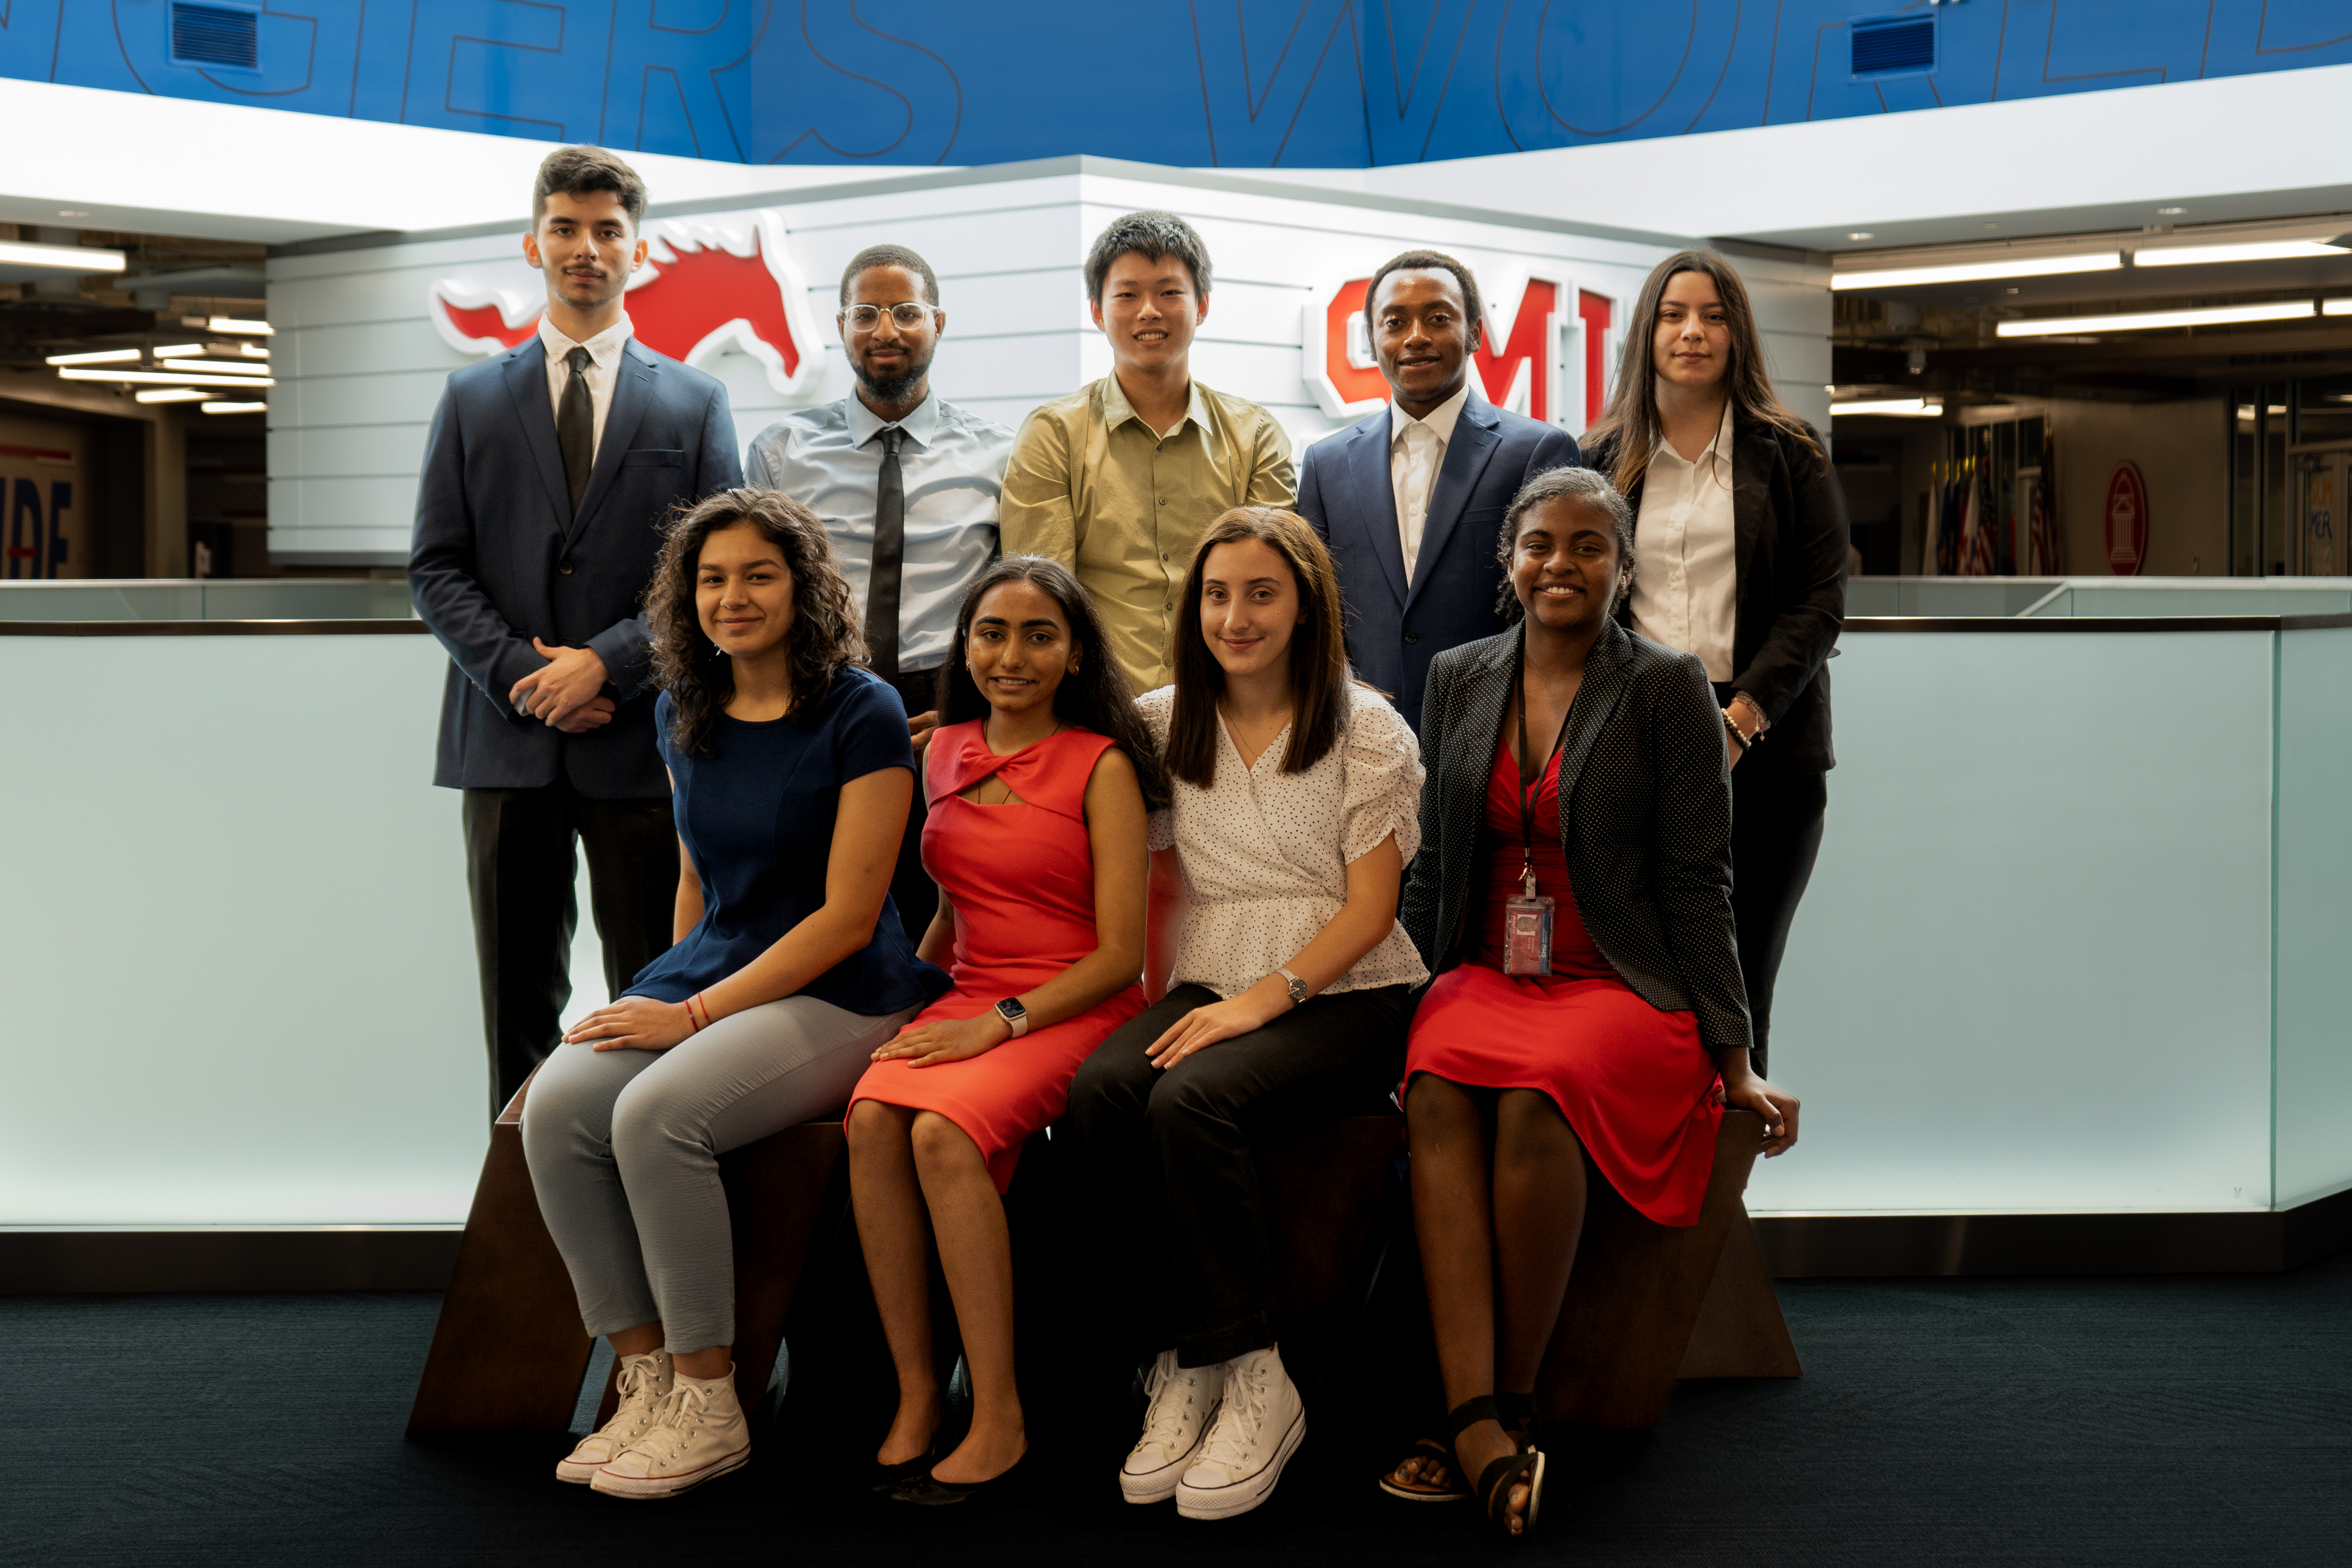 9 Students pose wearing business casual. 5 are standing on the back row, 4 are sitting in front on a bench.